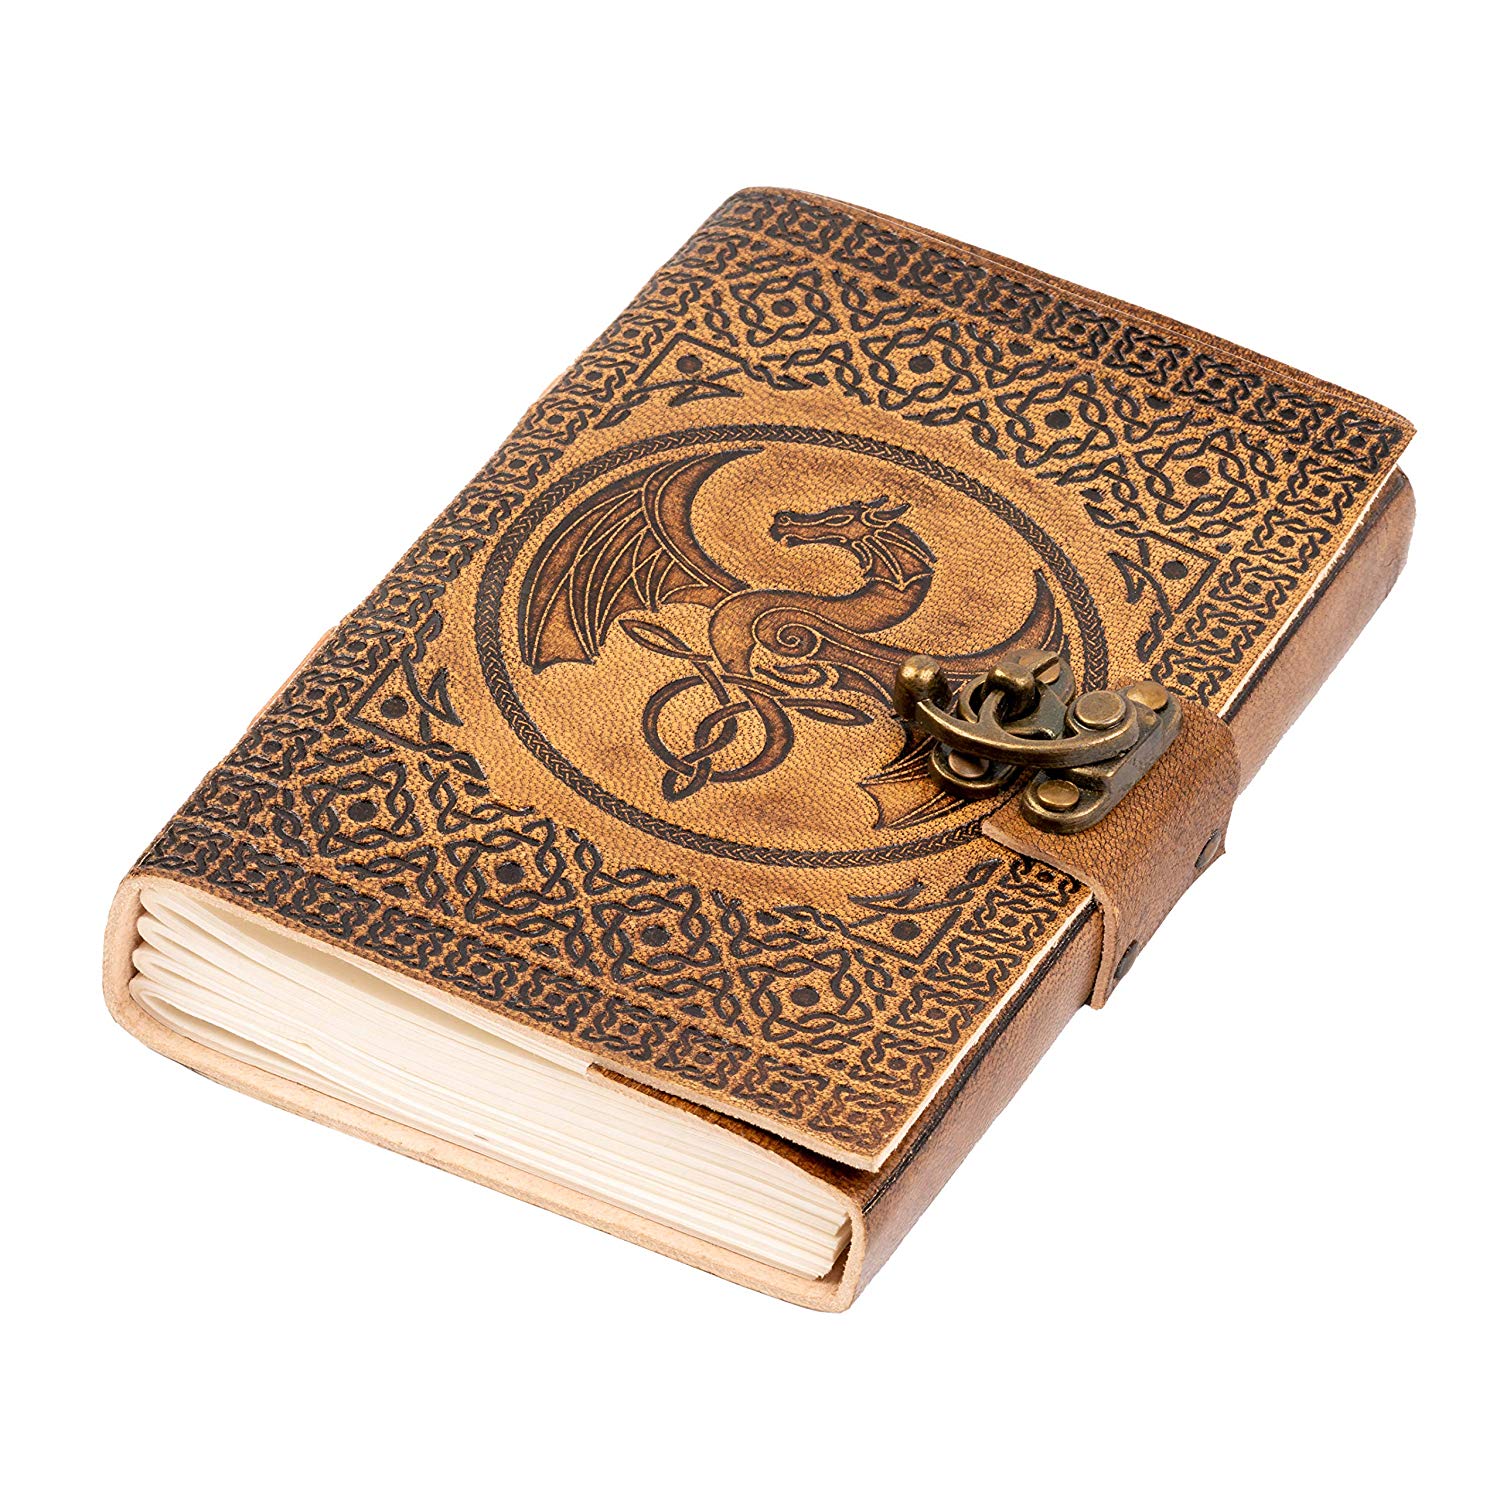 Sunset Dragon - A5 leather journal - aged or creme pages - Dragonarium